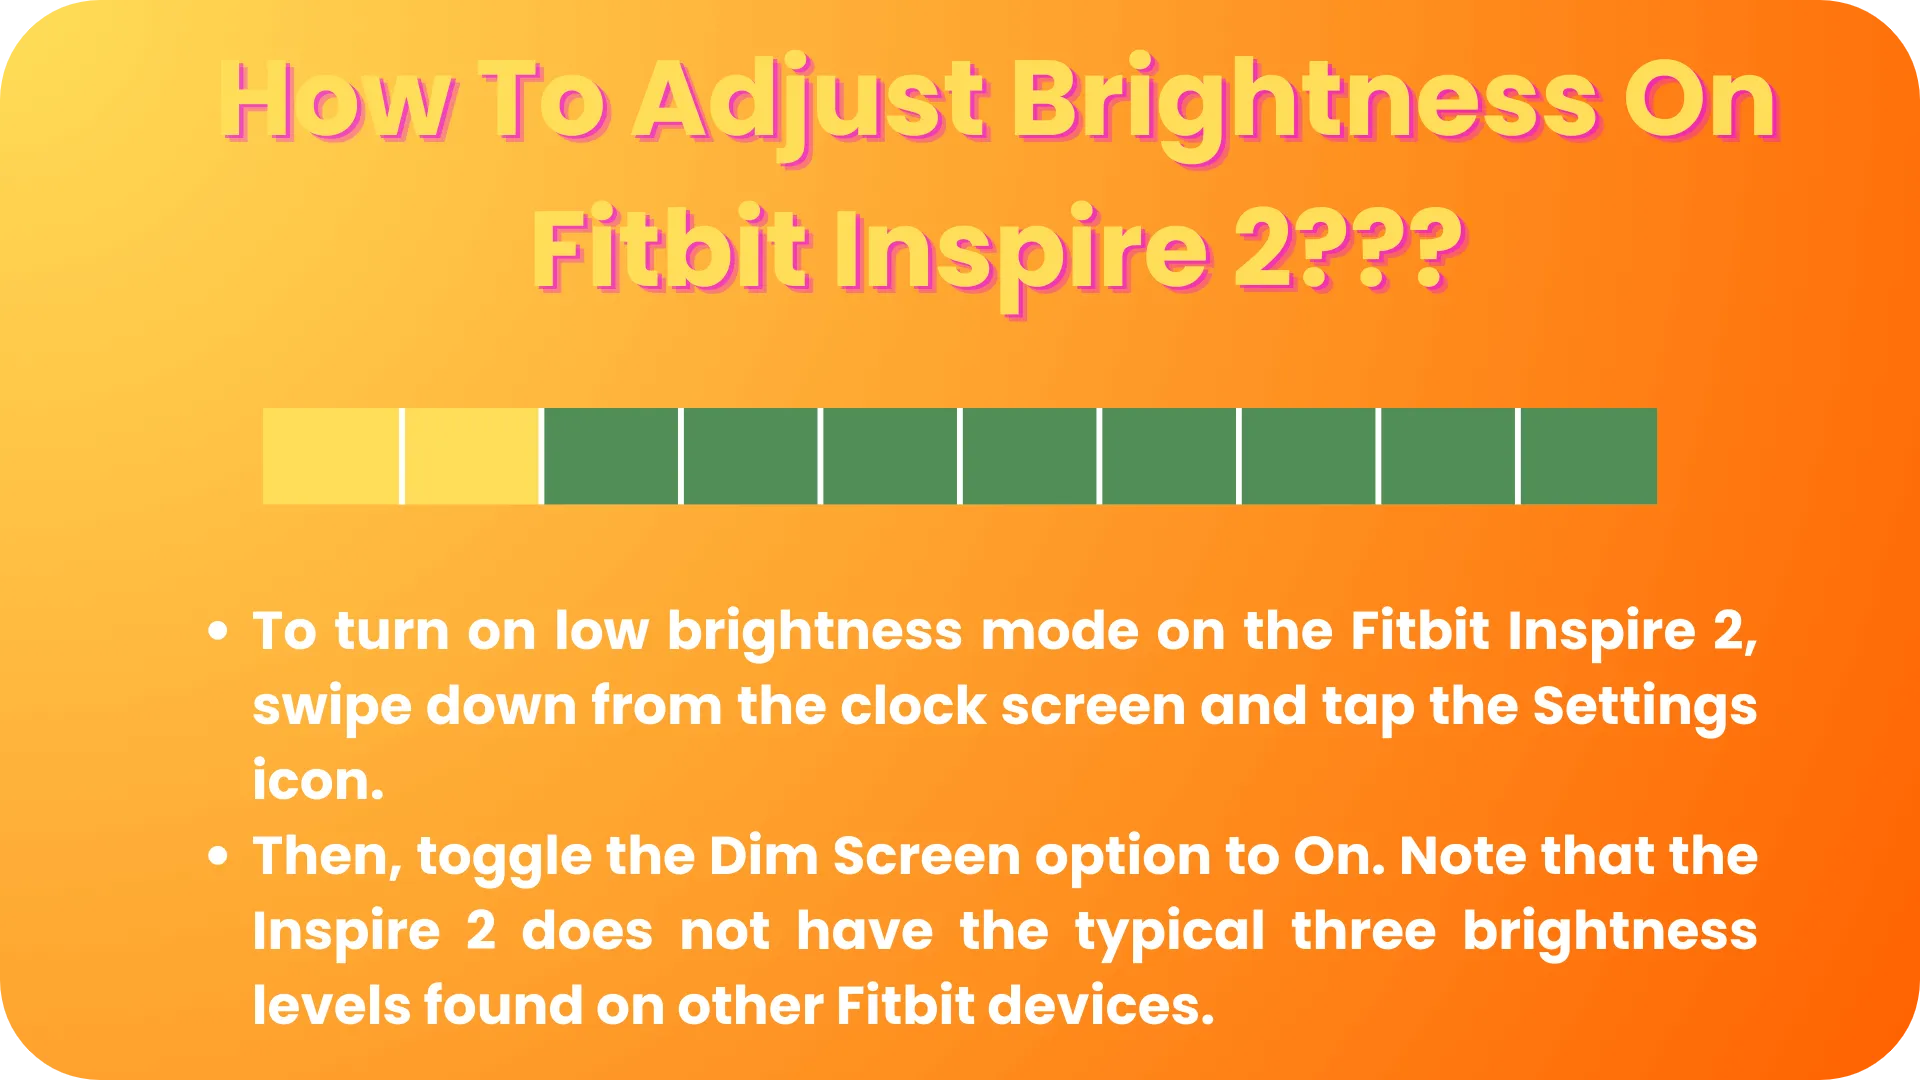 How To Adjust Brightness on Fitbit Inspire 2